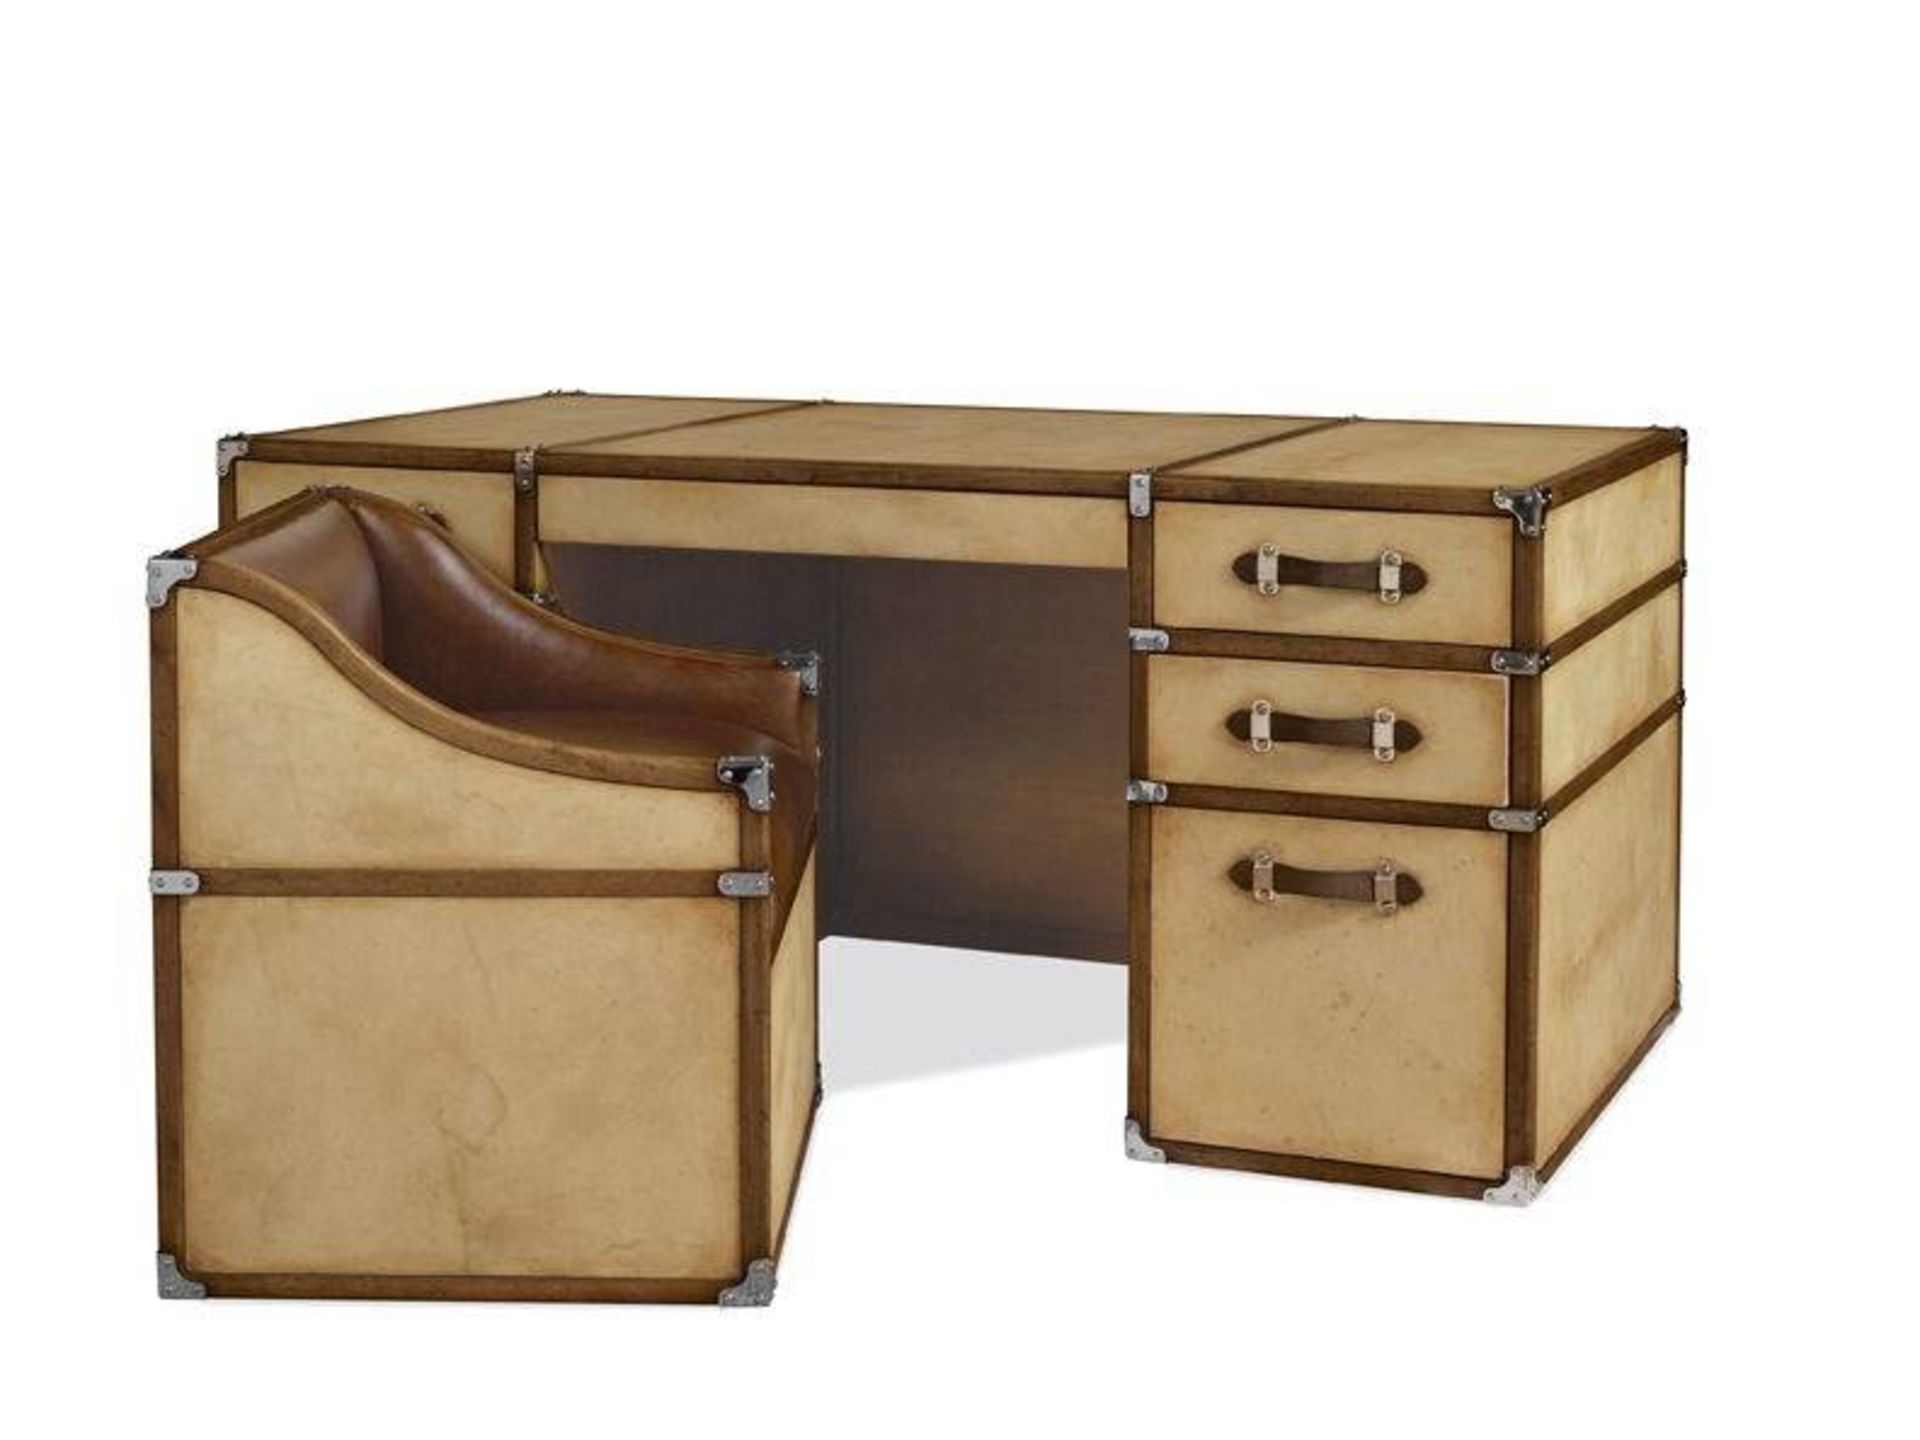 Drake Desk With Chair Vellum Wrapped Contemporary Desk And Chair A Modern And Contemporary Feel To